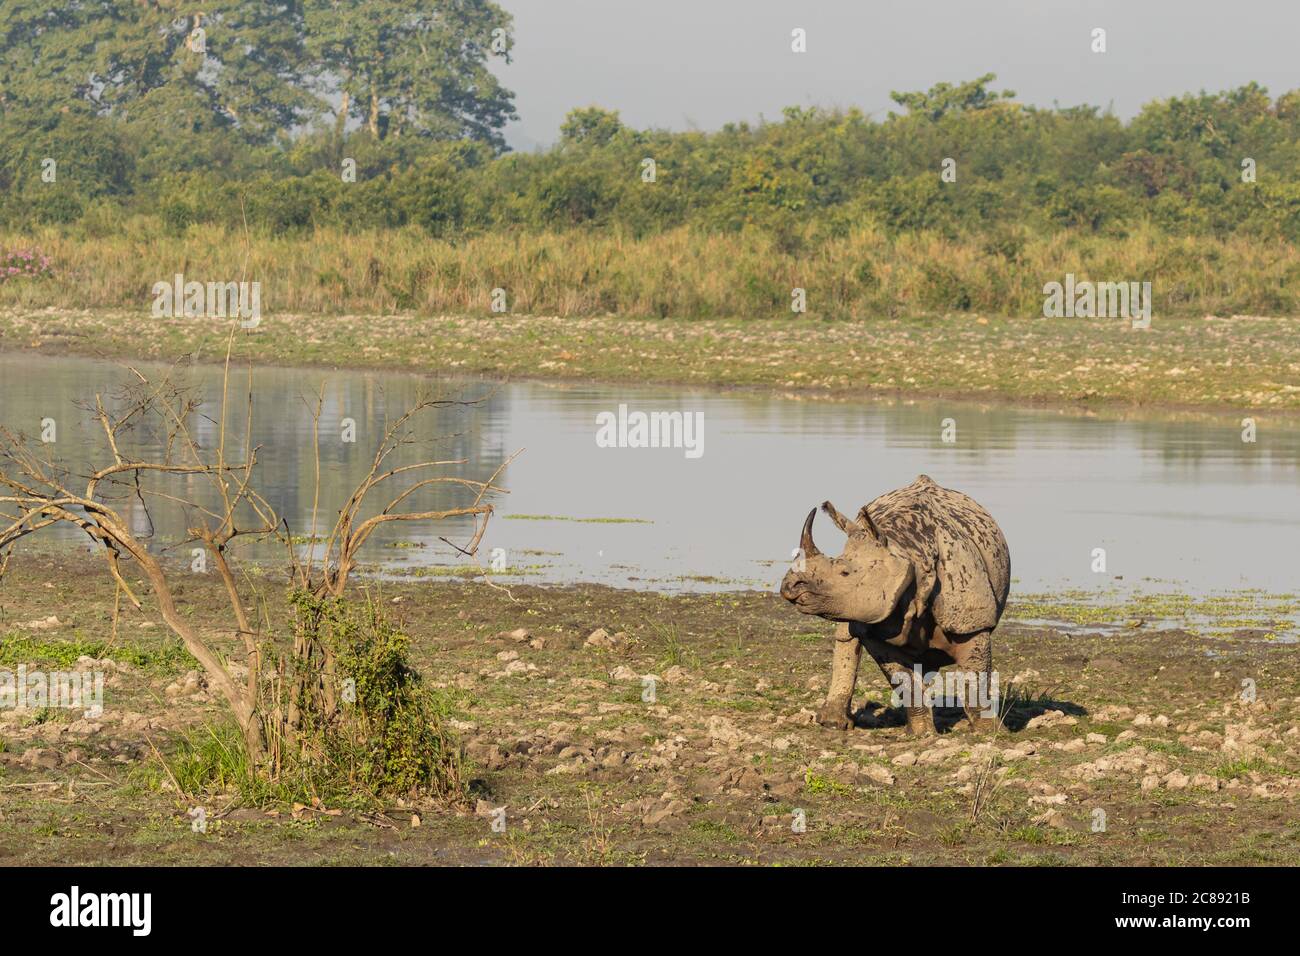 A one horned rhino standing amidst tall grass in a national park in Assam India Stock Photo